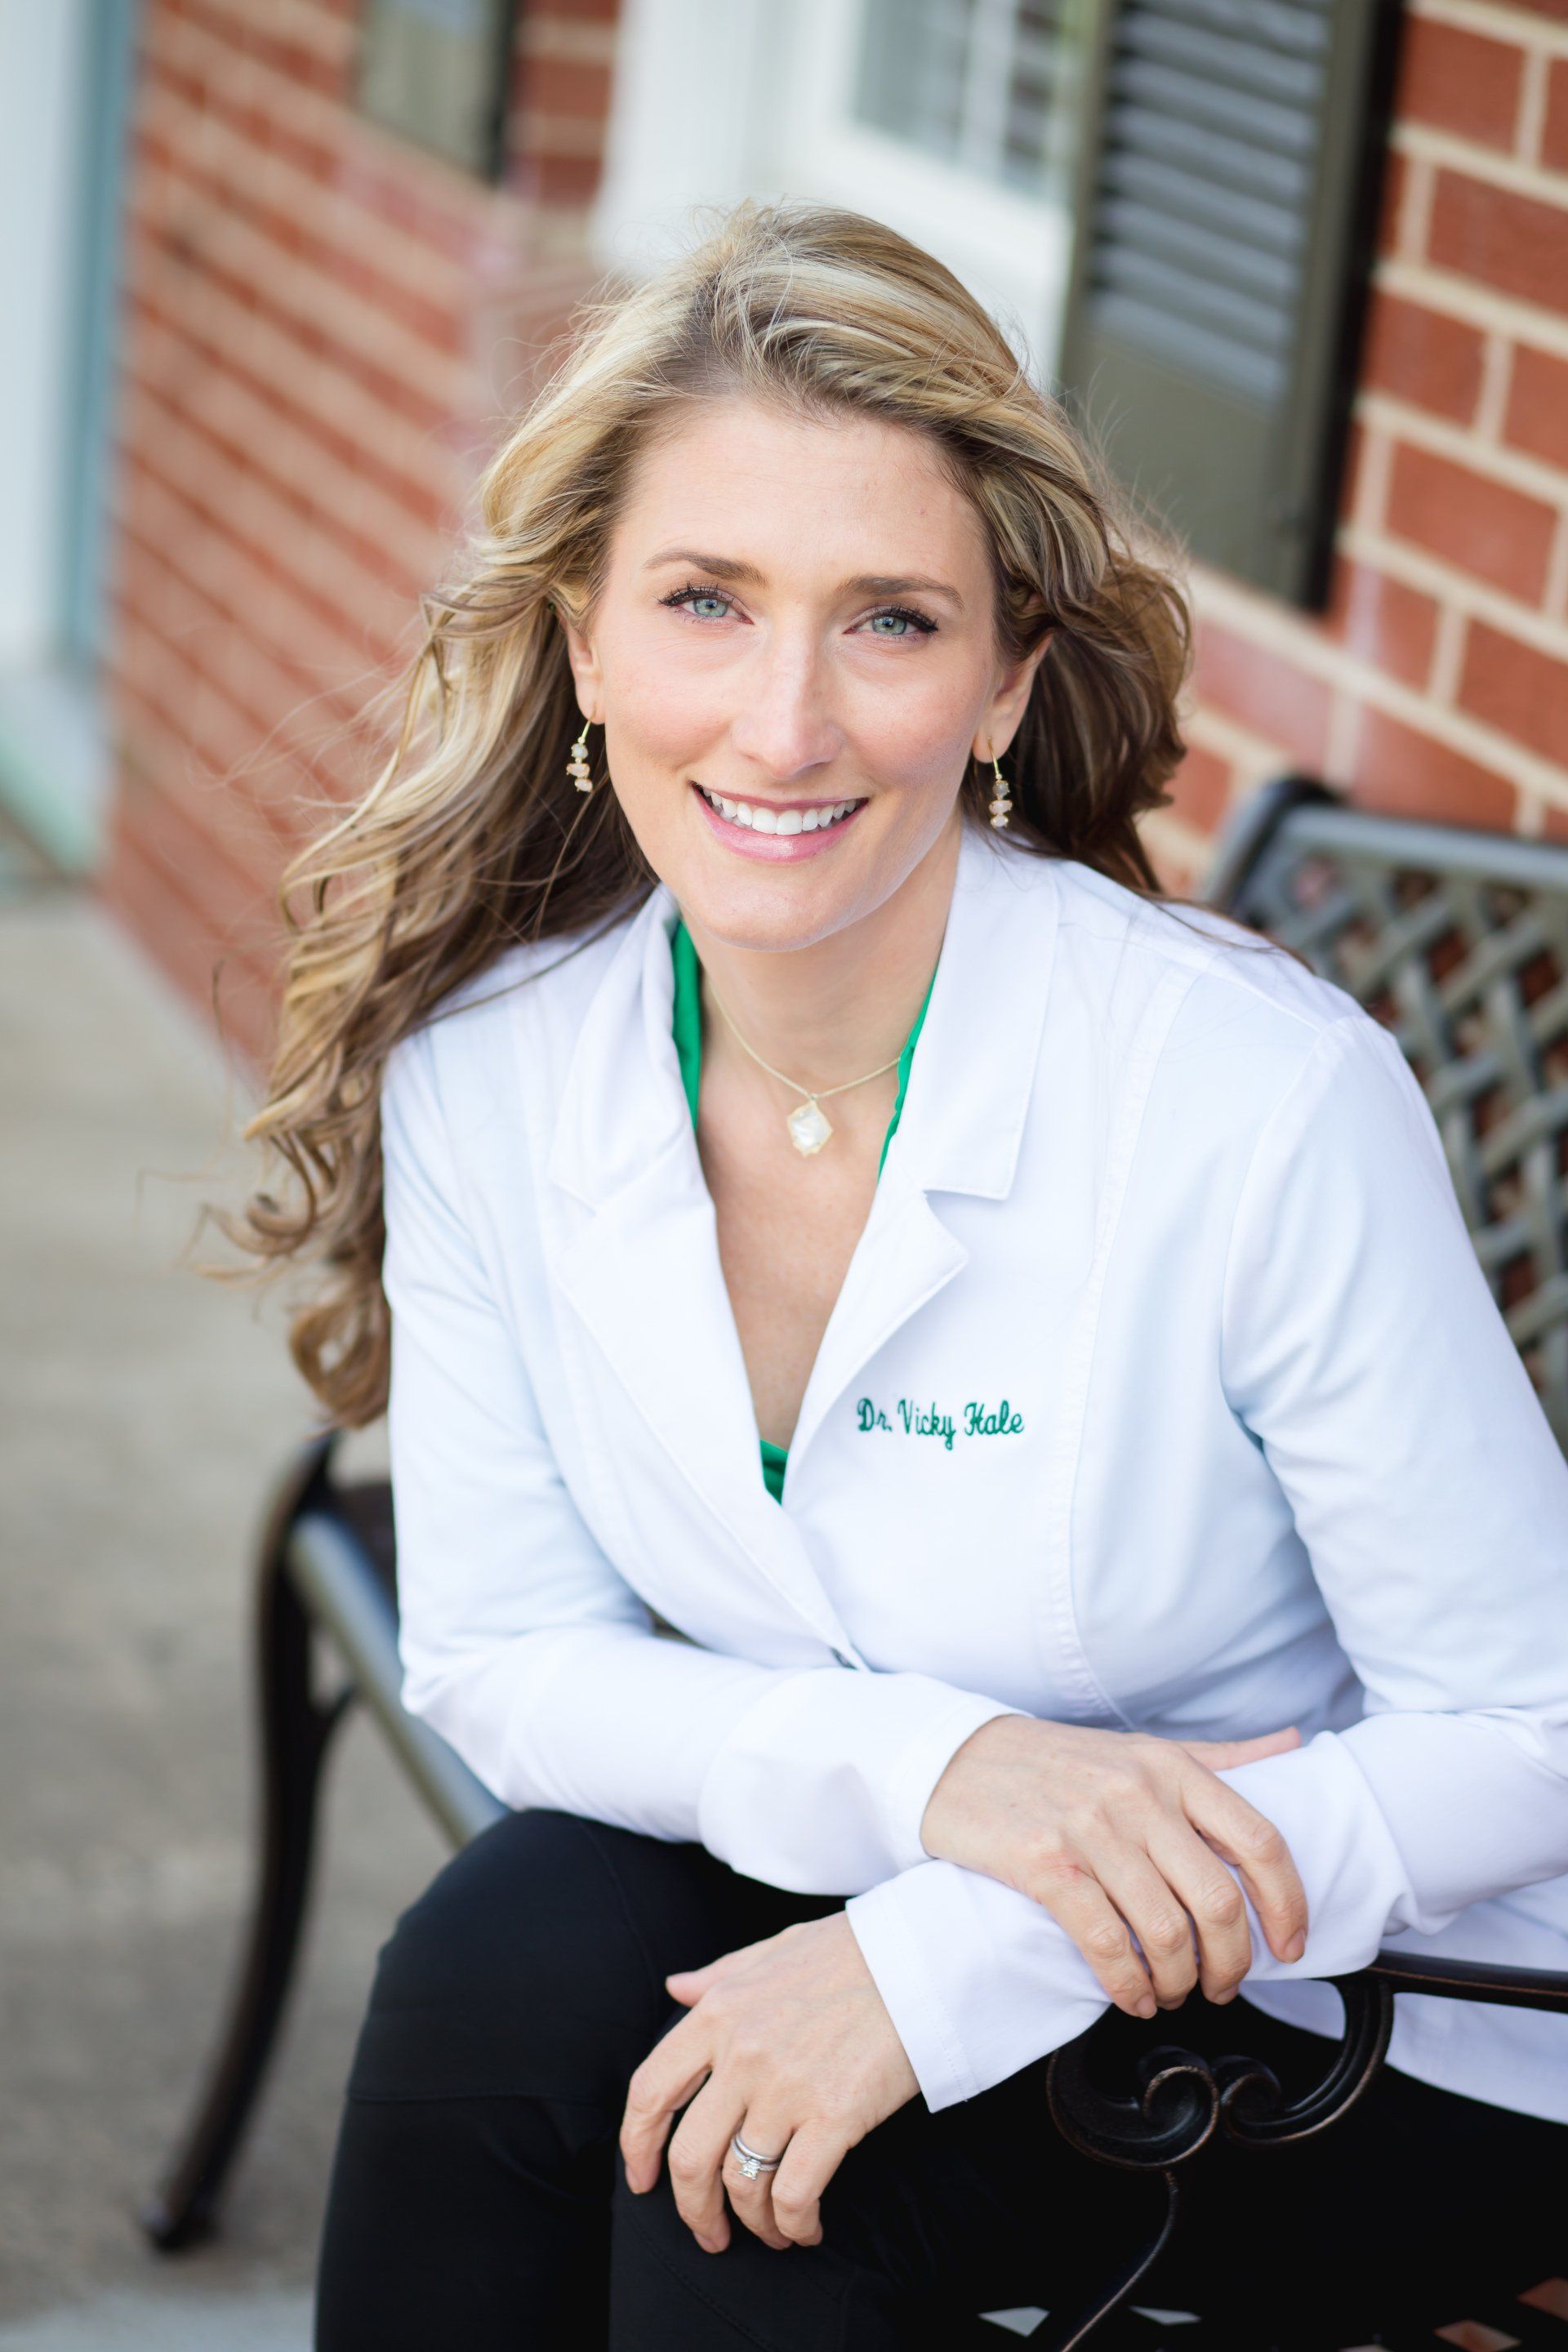 Dr. Vicky Hale DDS is a dentist at Hale Family Dentistry in Orange VA